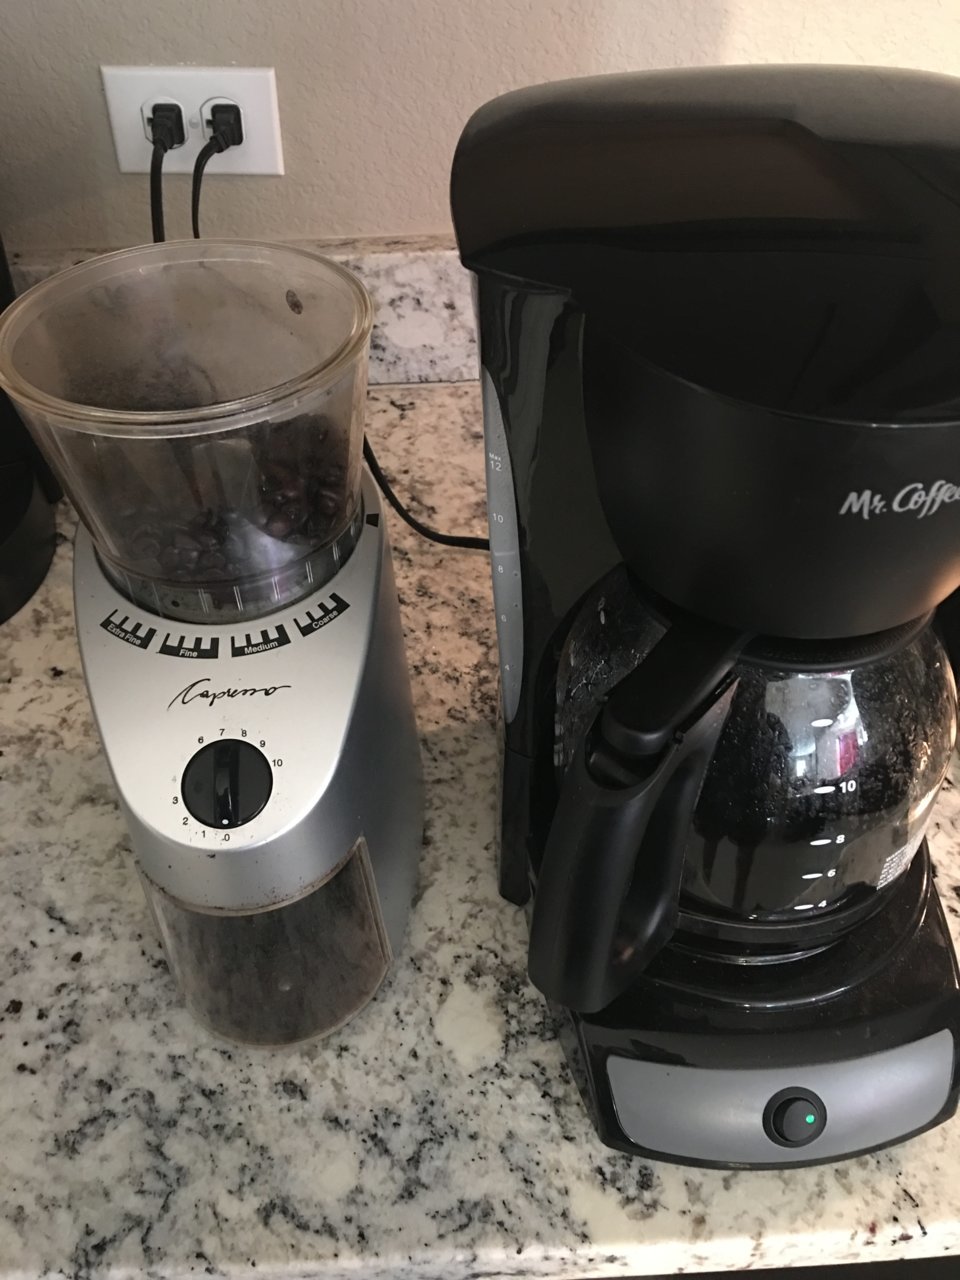 Mr. Coffee Single Serve Latte + Iced + Hot Coffee Maker & Milk Frother -  Shop Coffee Makers at H-E-B